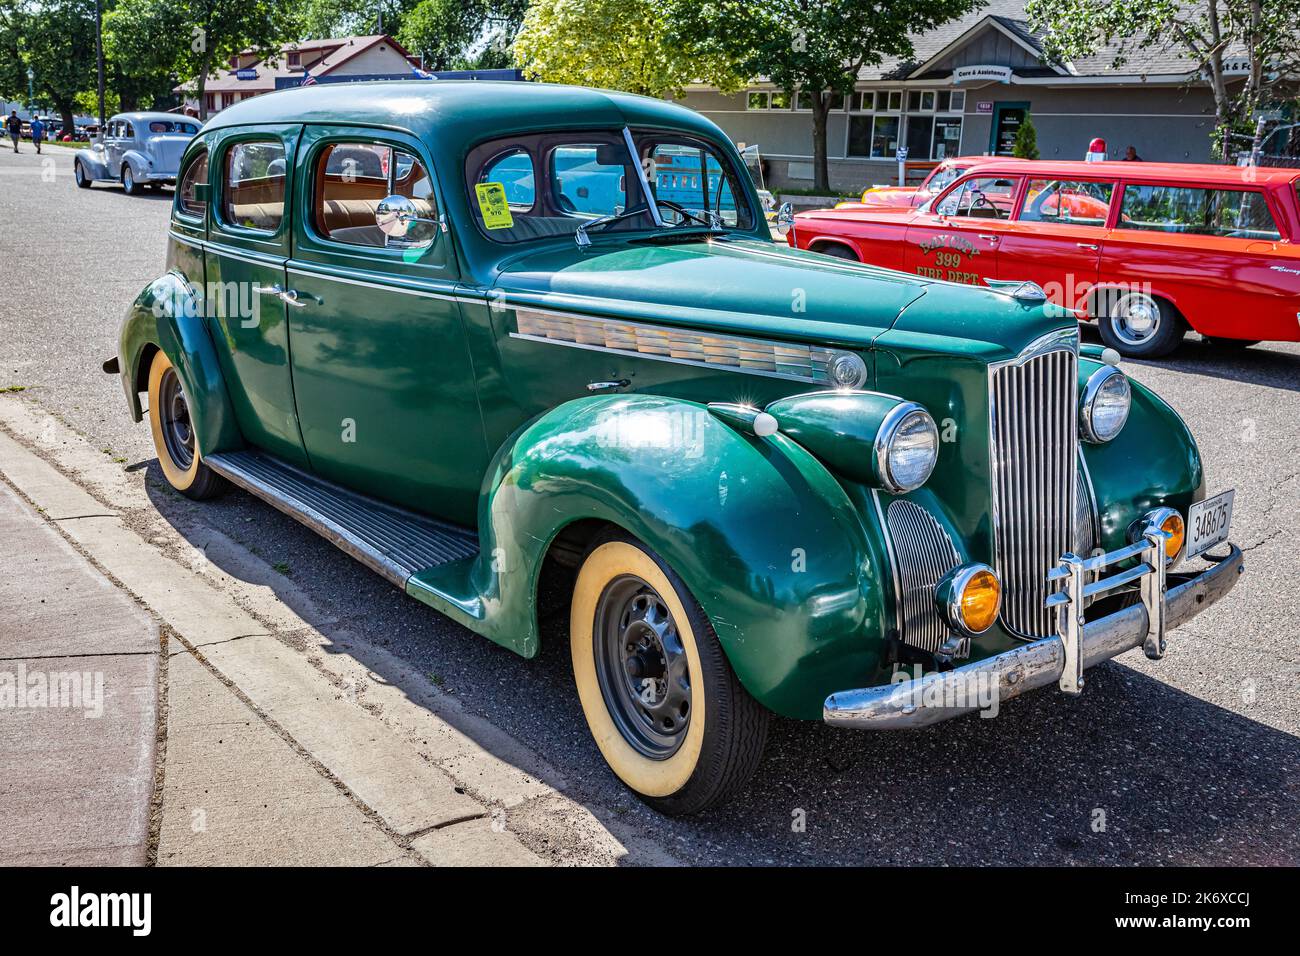 Falcon Heights, MN - June 19, 2022: High perspective front corner view of a 1940 Packard 110 4 Door Sedan at a local car show. Stock Photo